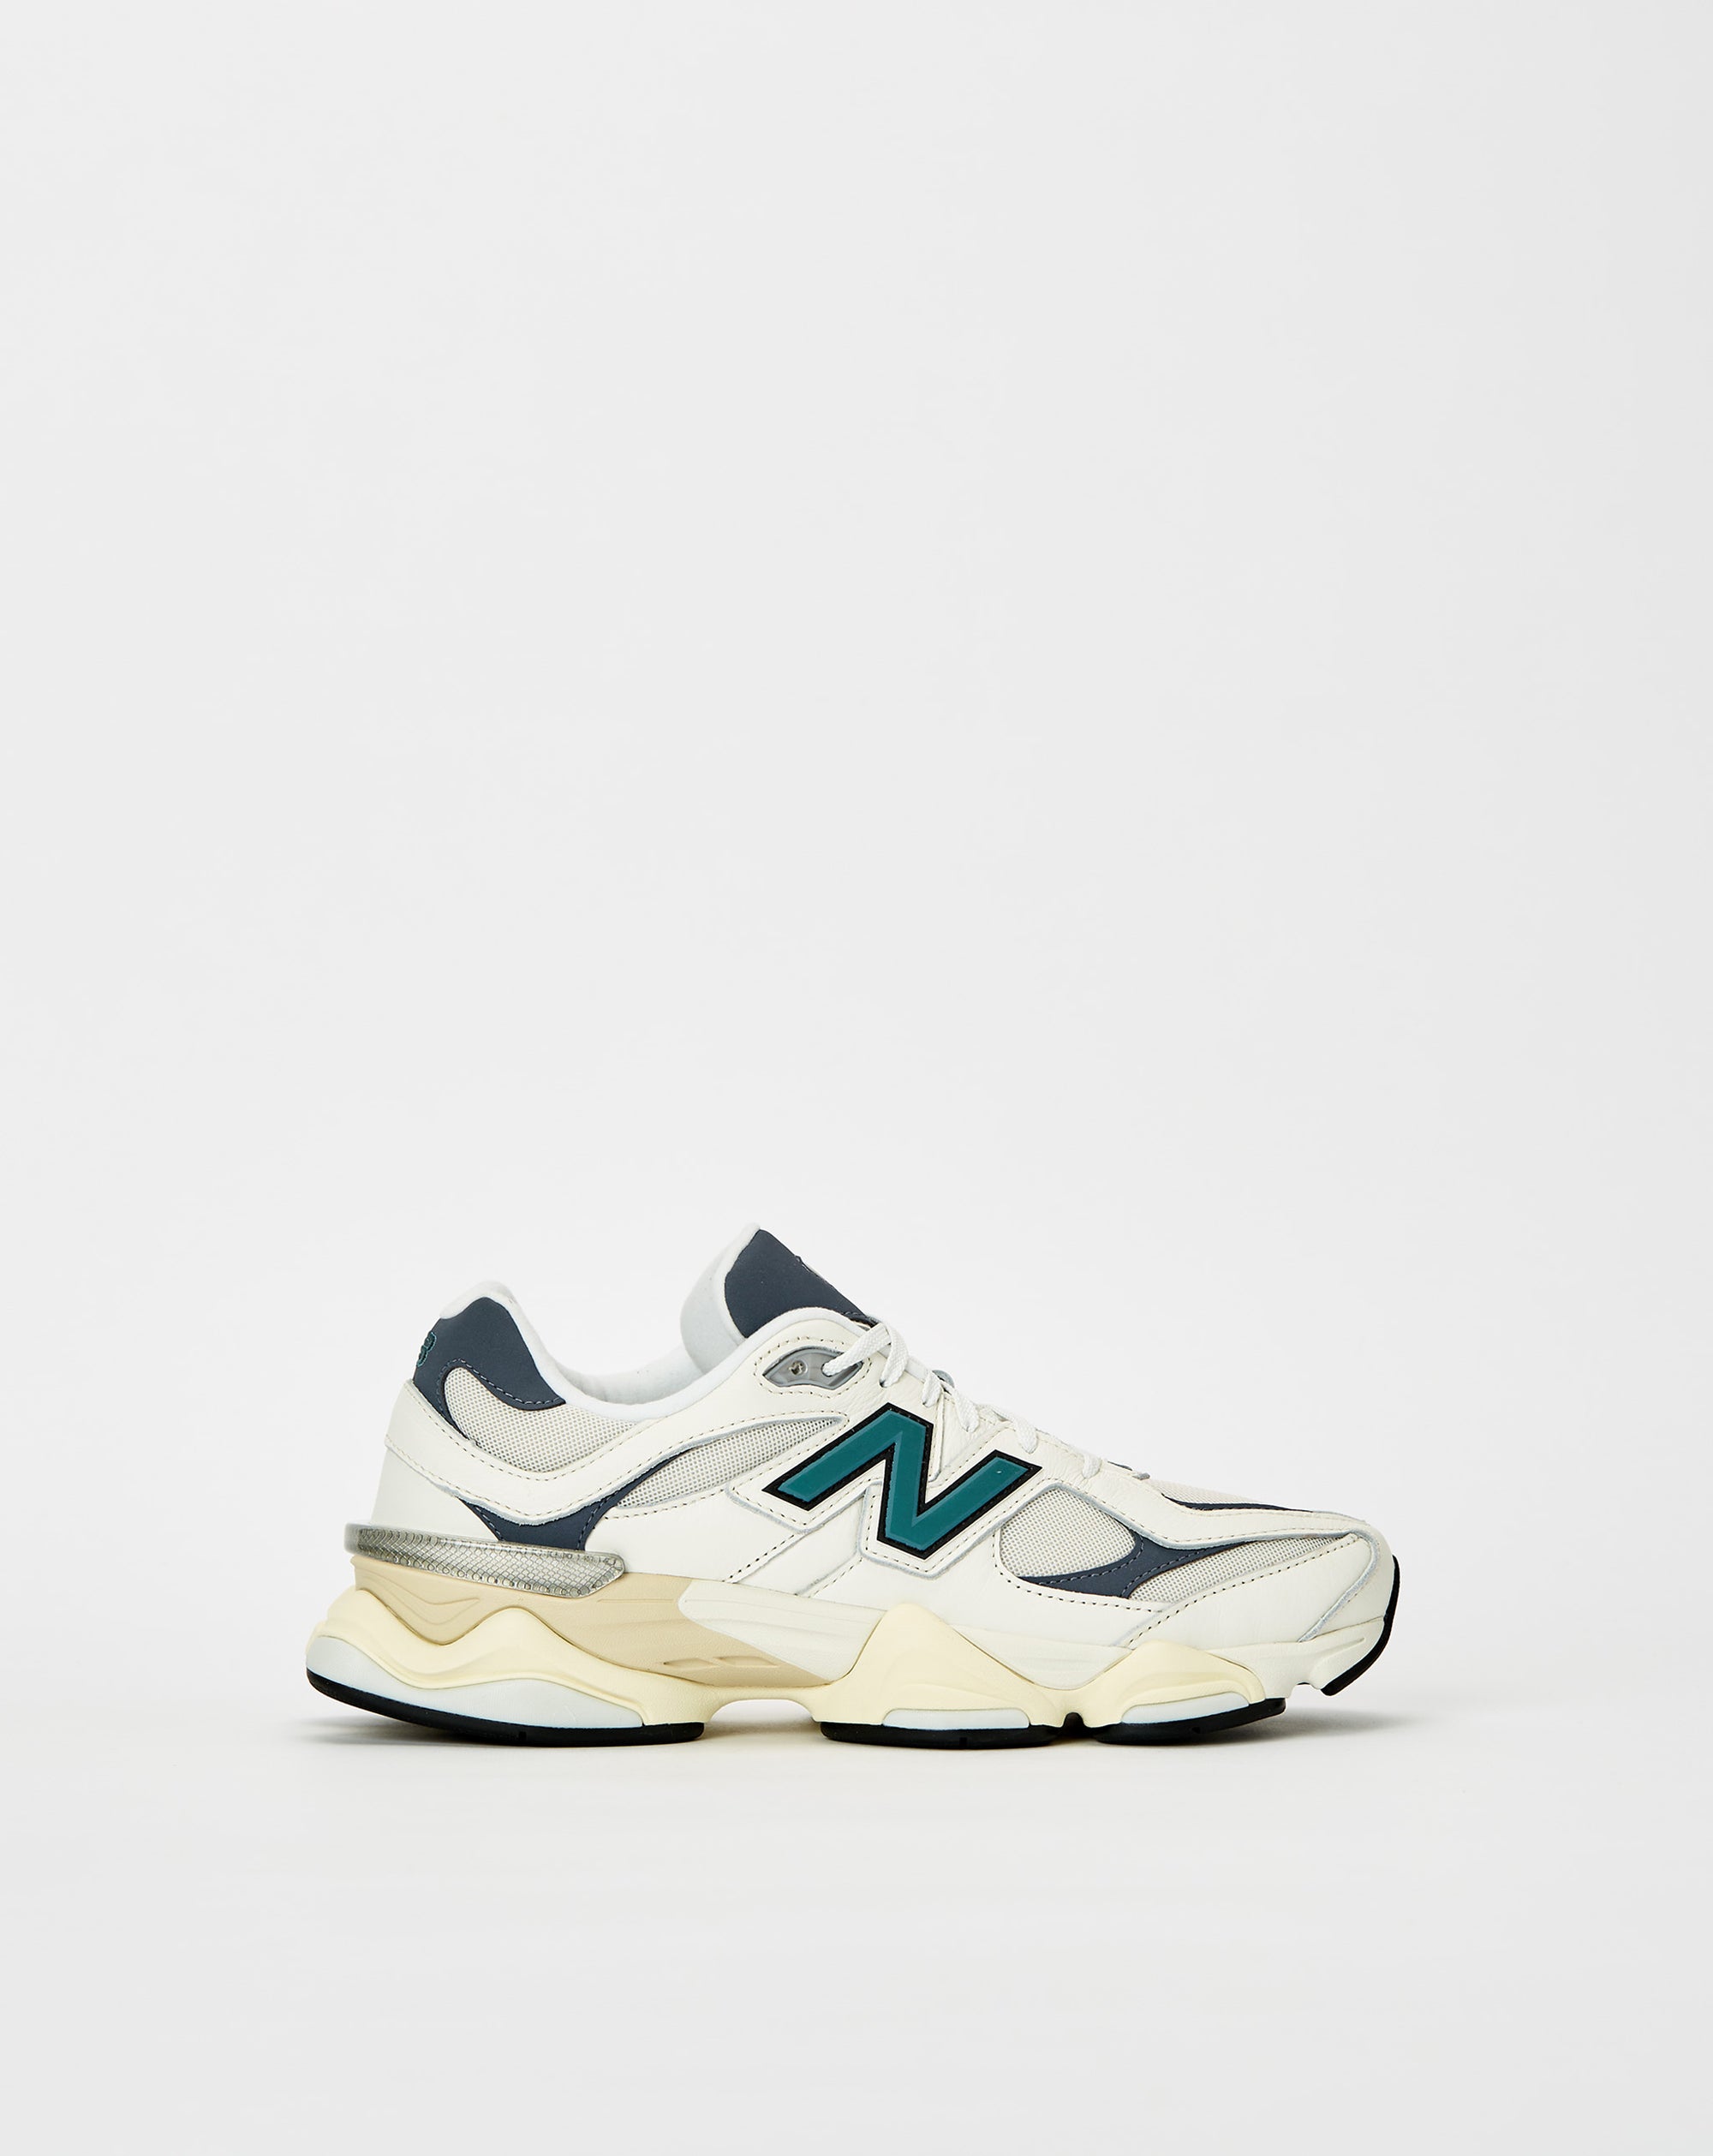 New Balance 9060 'New Spruce' - Rule of Next Footwear